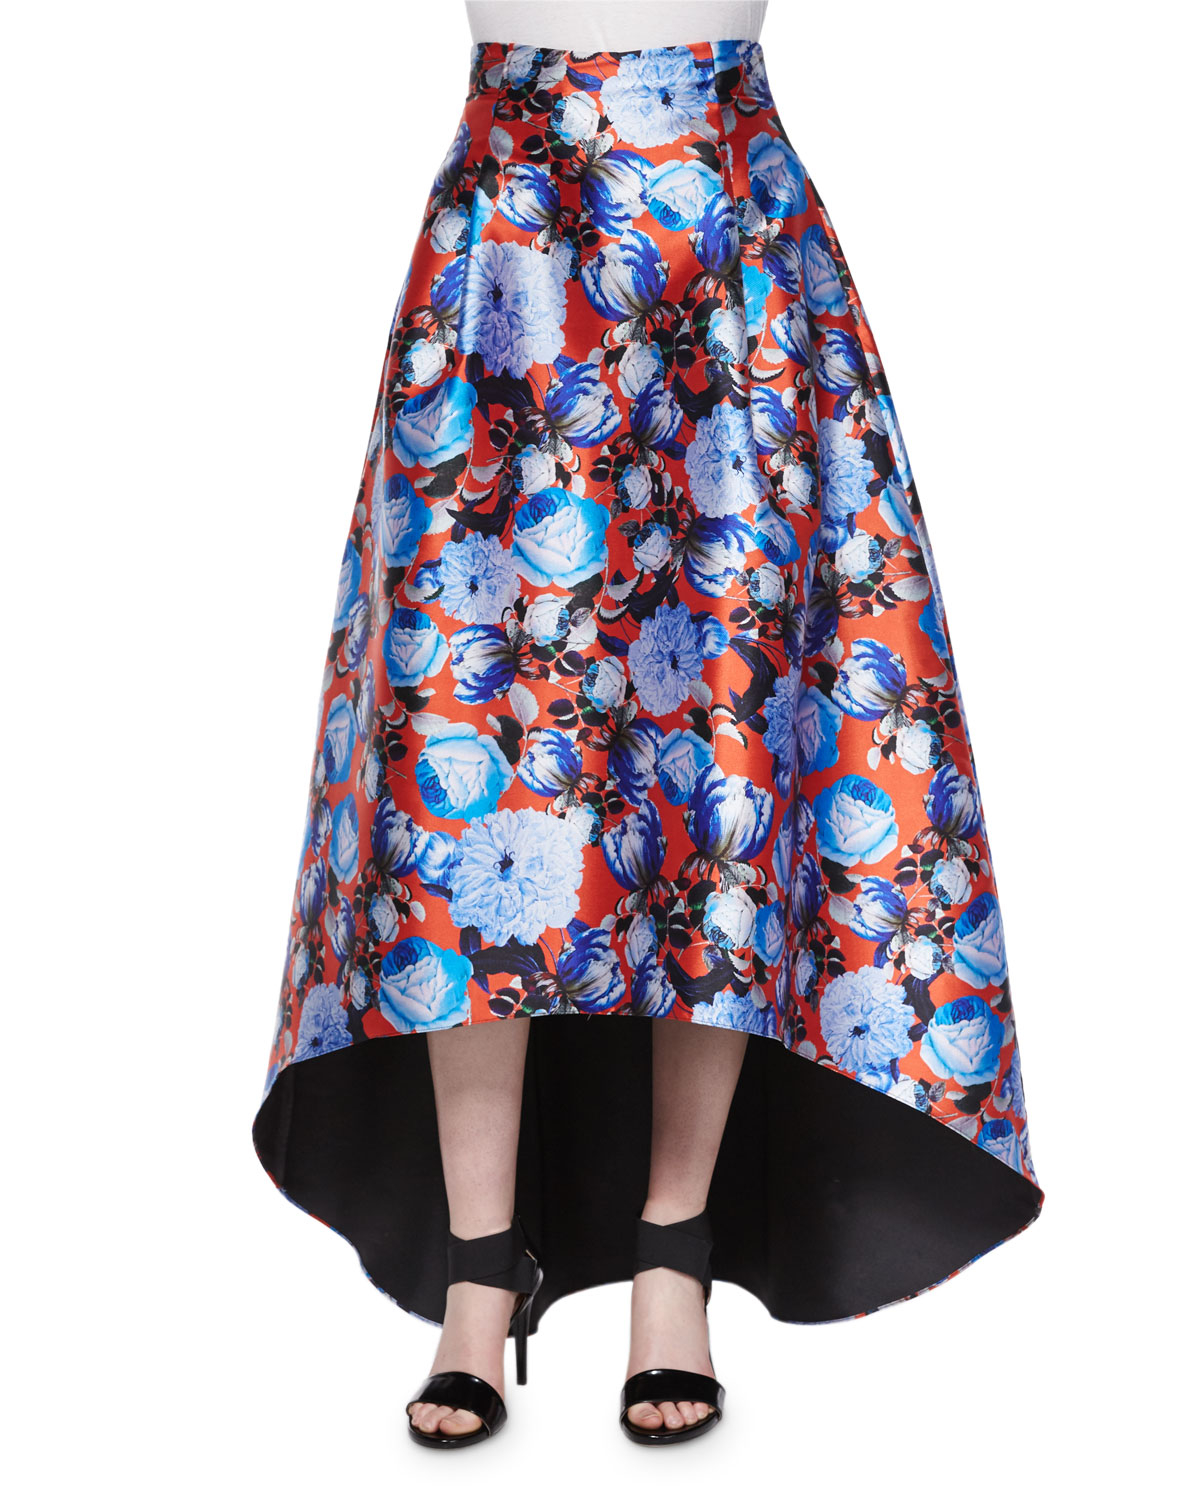 Lyst - Sachin & Babi Floral-print High-low Skirt in Blue